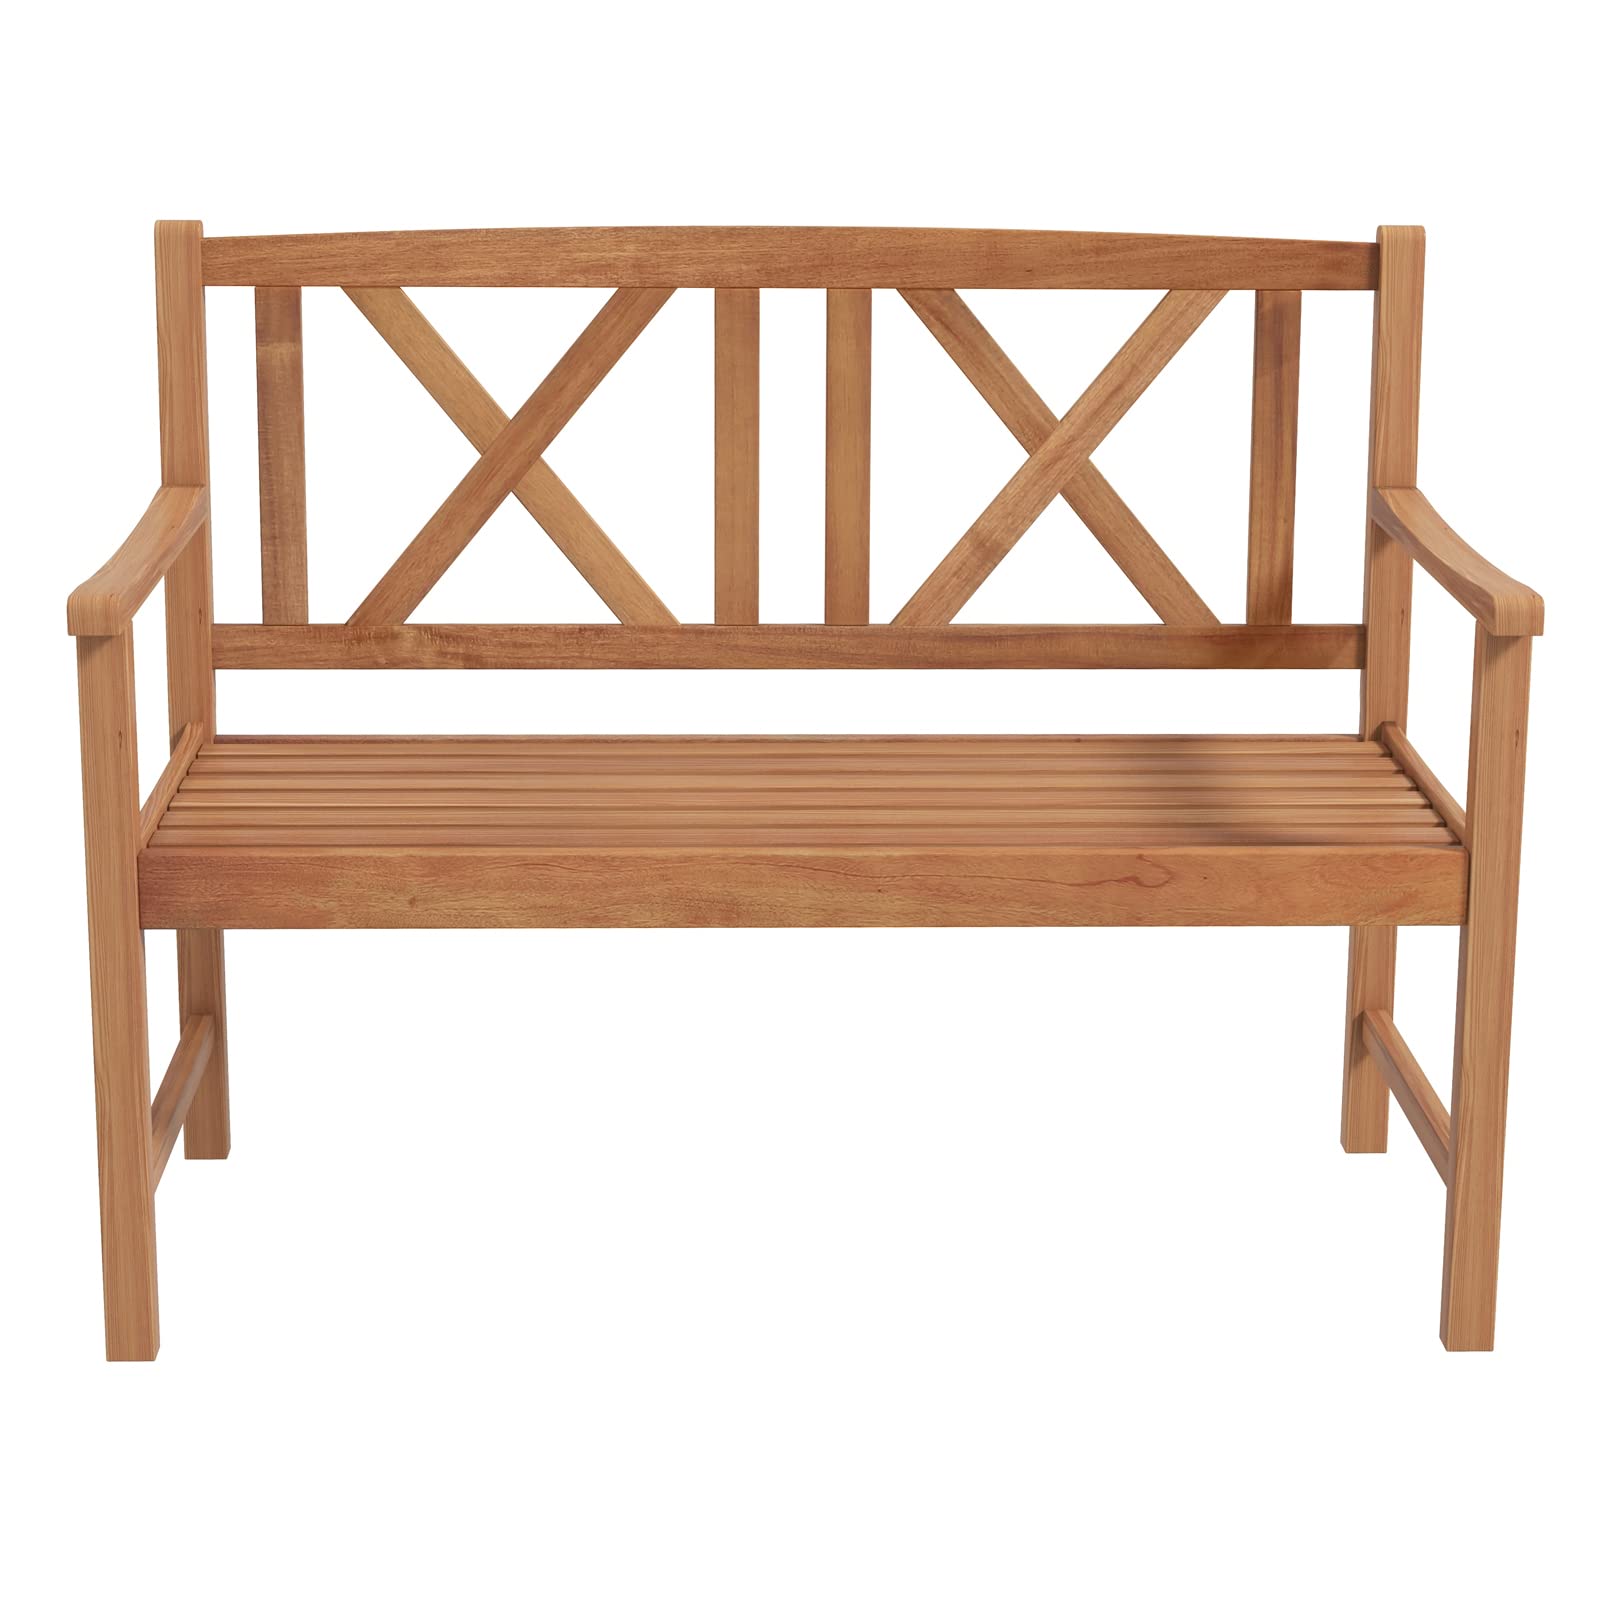 Giantex Outside Garden Bench Loveseat - 2-Person Acacia Wood Bench with Armrest